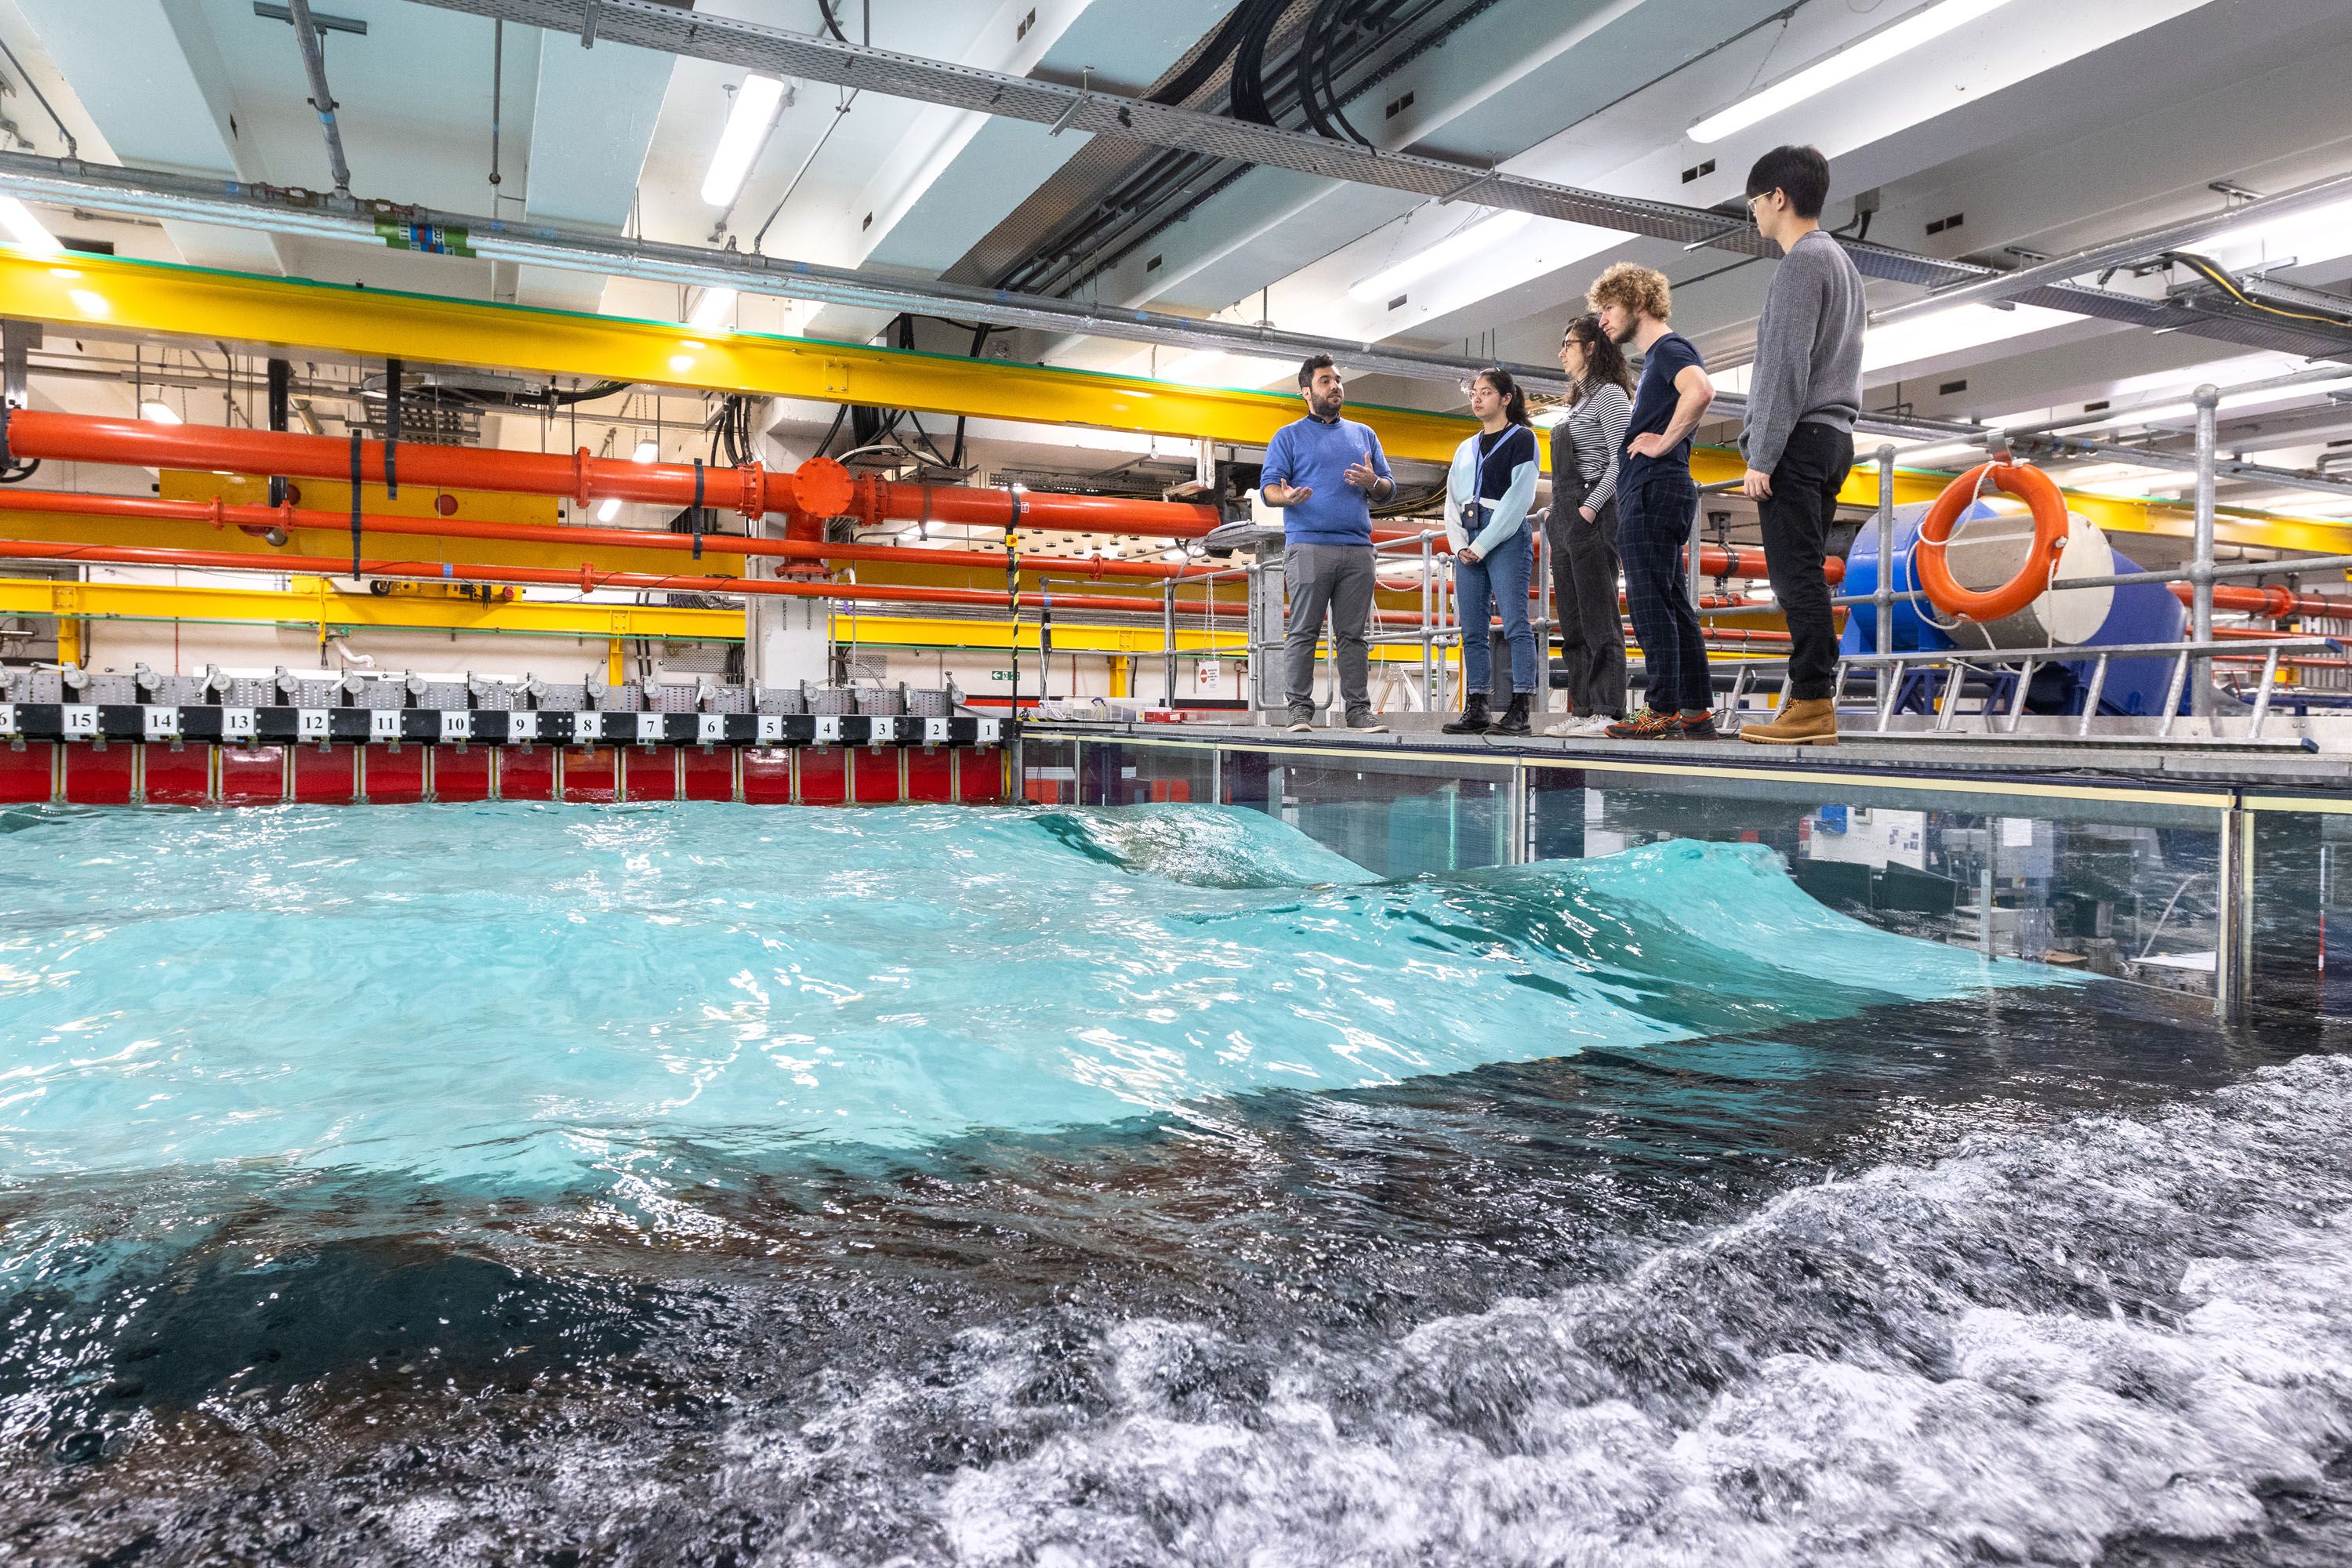 A lecturer talks to students as they stand on a platform above the wave tank